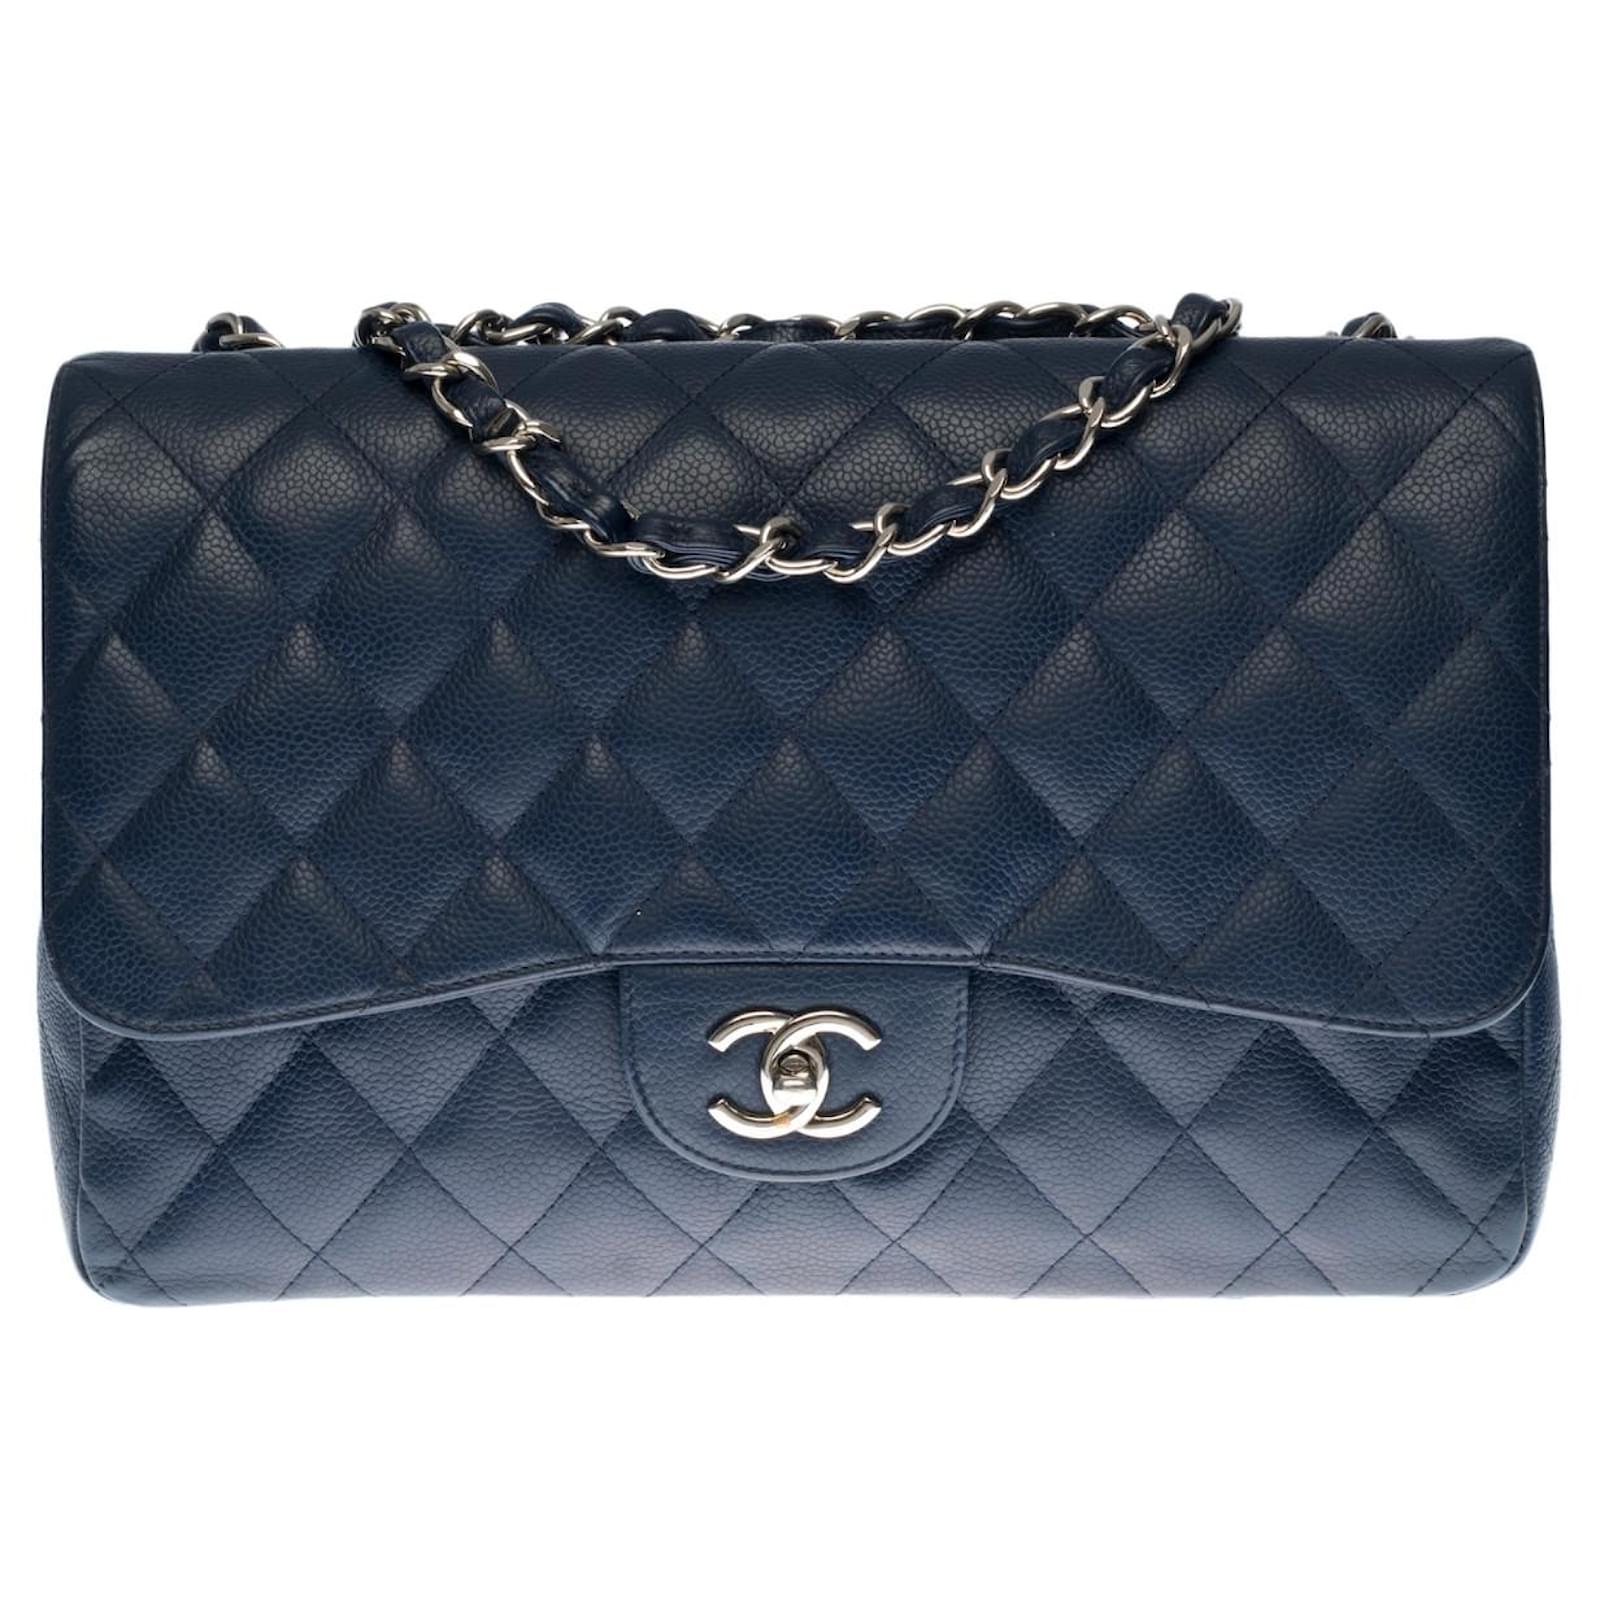 Le Classieux Chanel Timeless Jumbo Flap bag in navy blue quilted